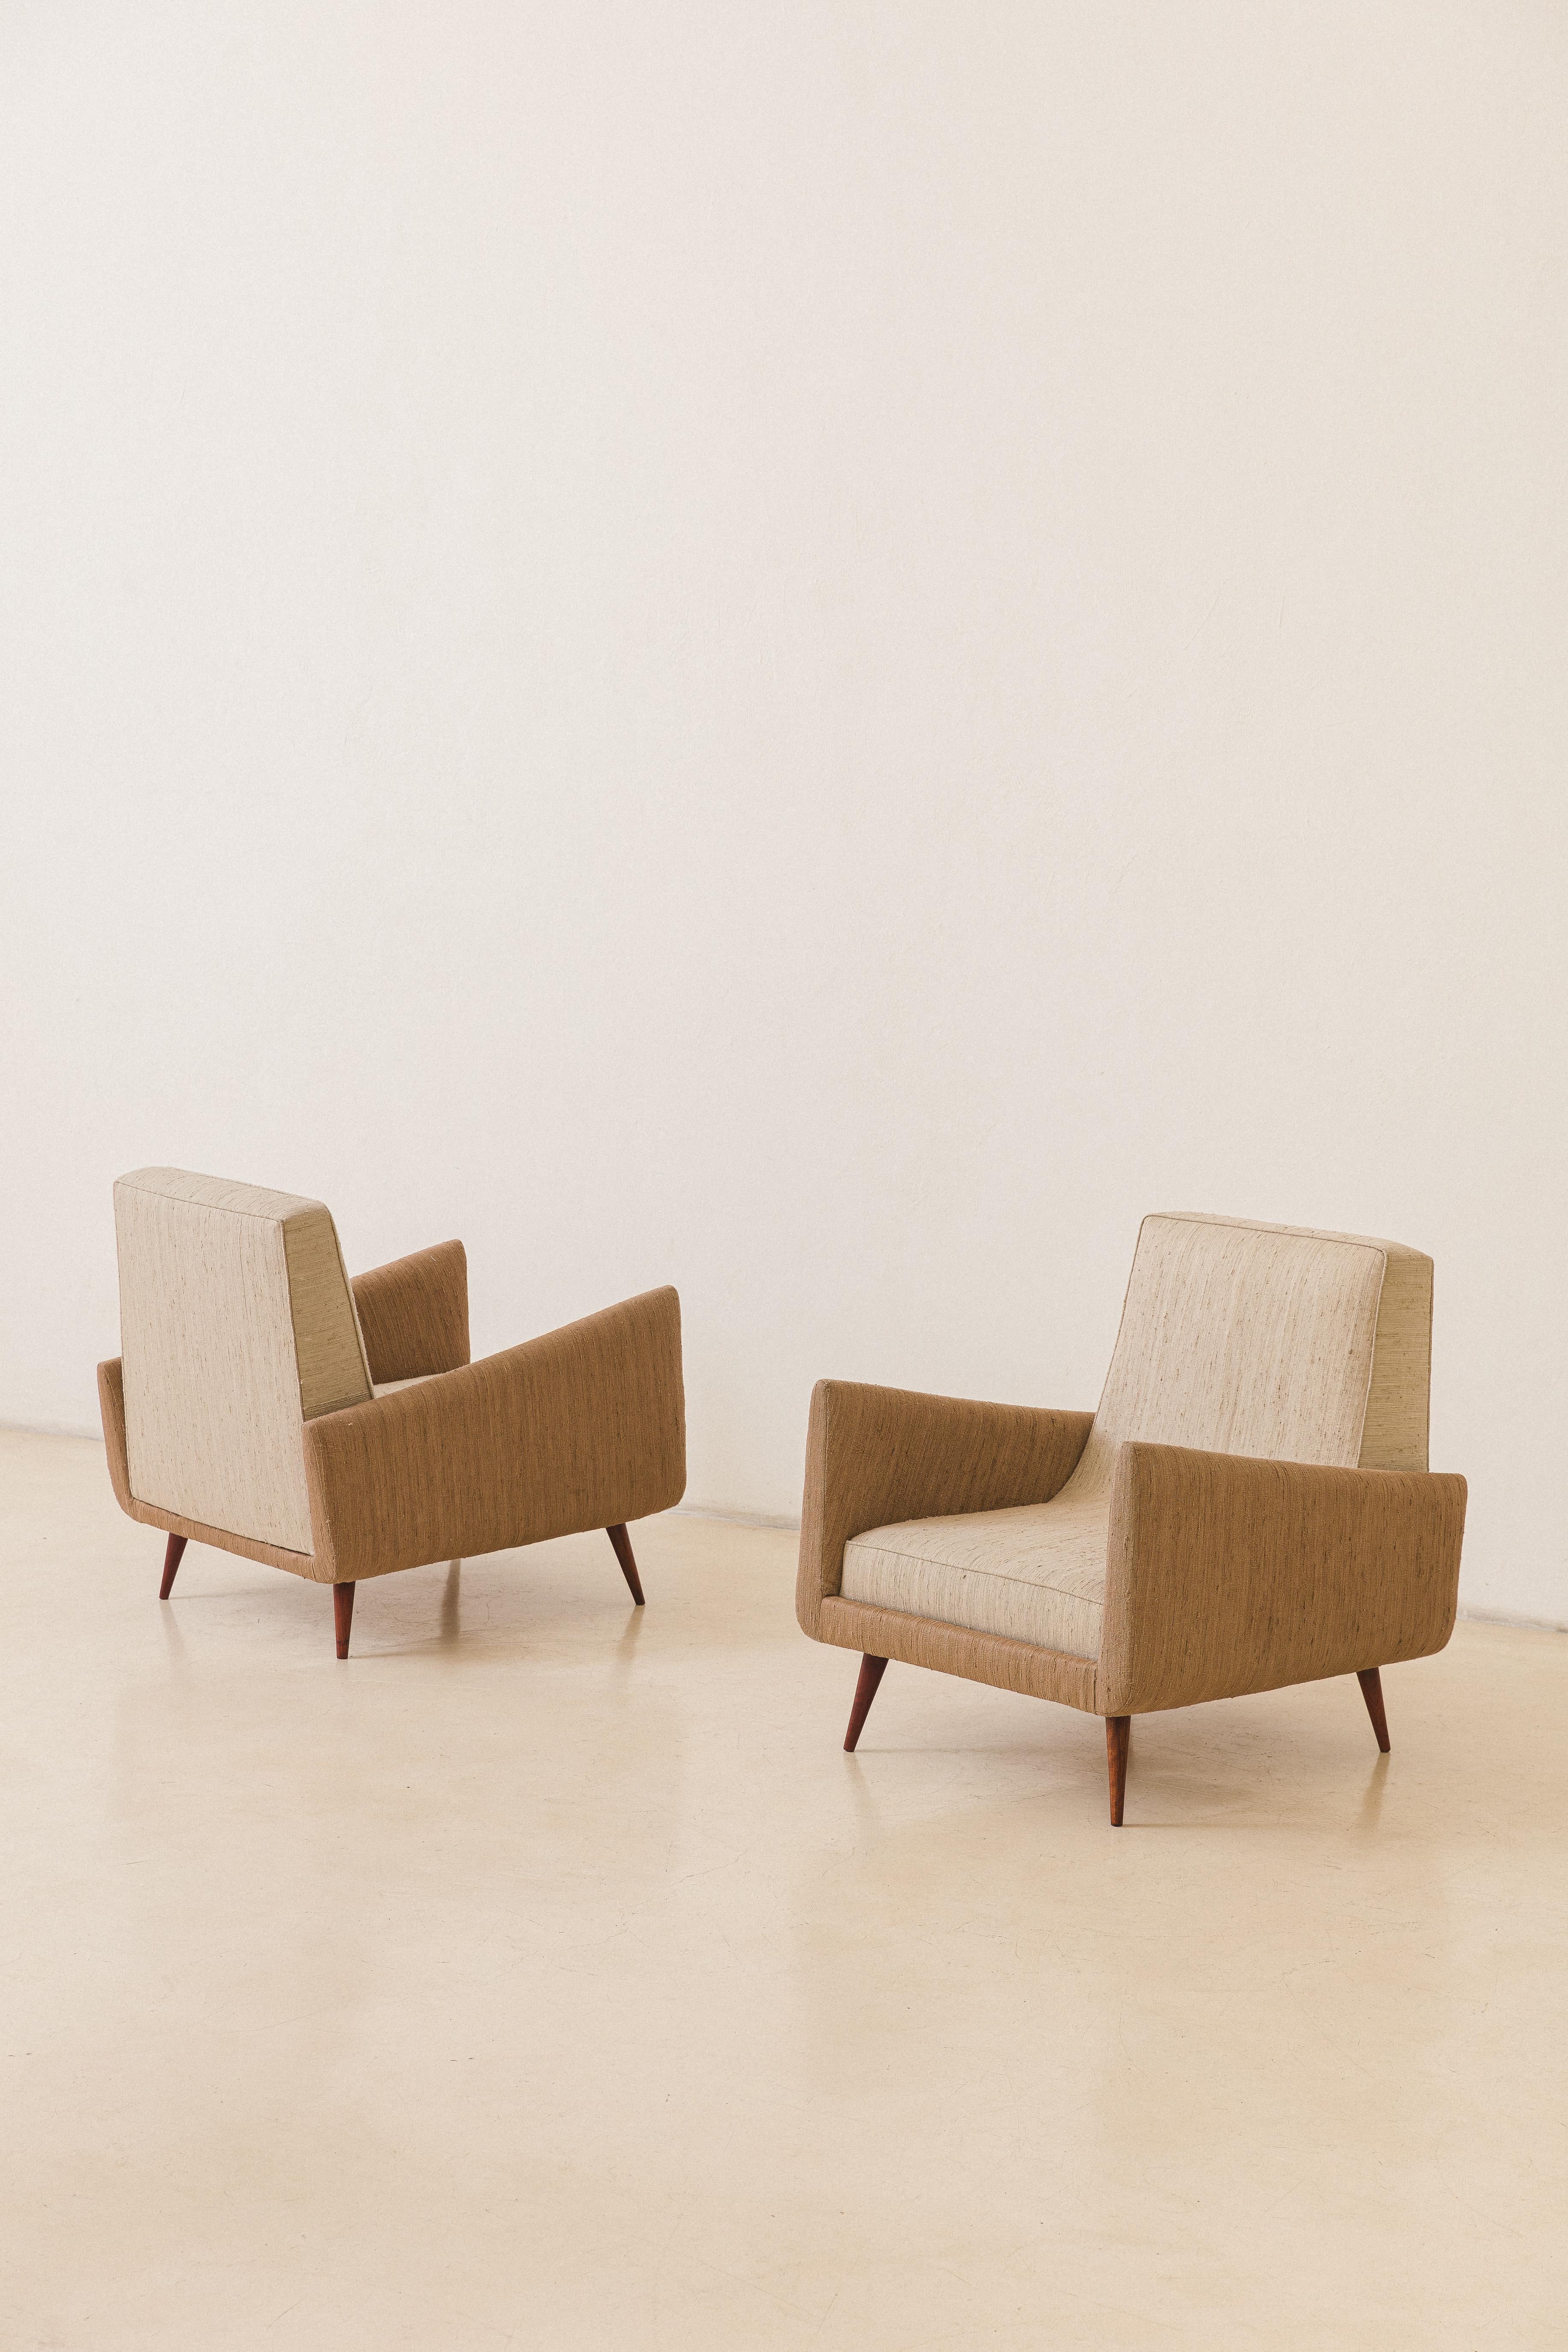 Mid-Century Modern Jorge Zalszupin 801 Armchairs, Rosewood and Fabric, Brazilian MidCentury, 1959 For Sale